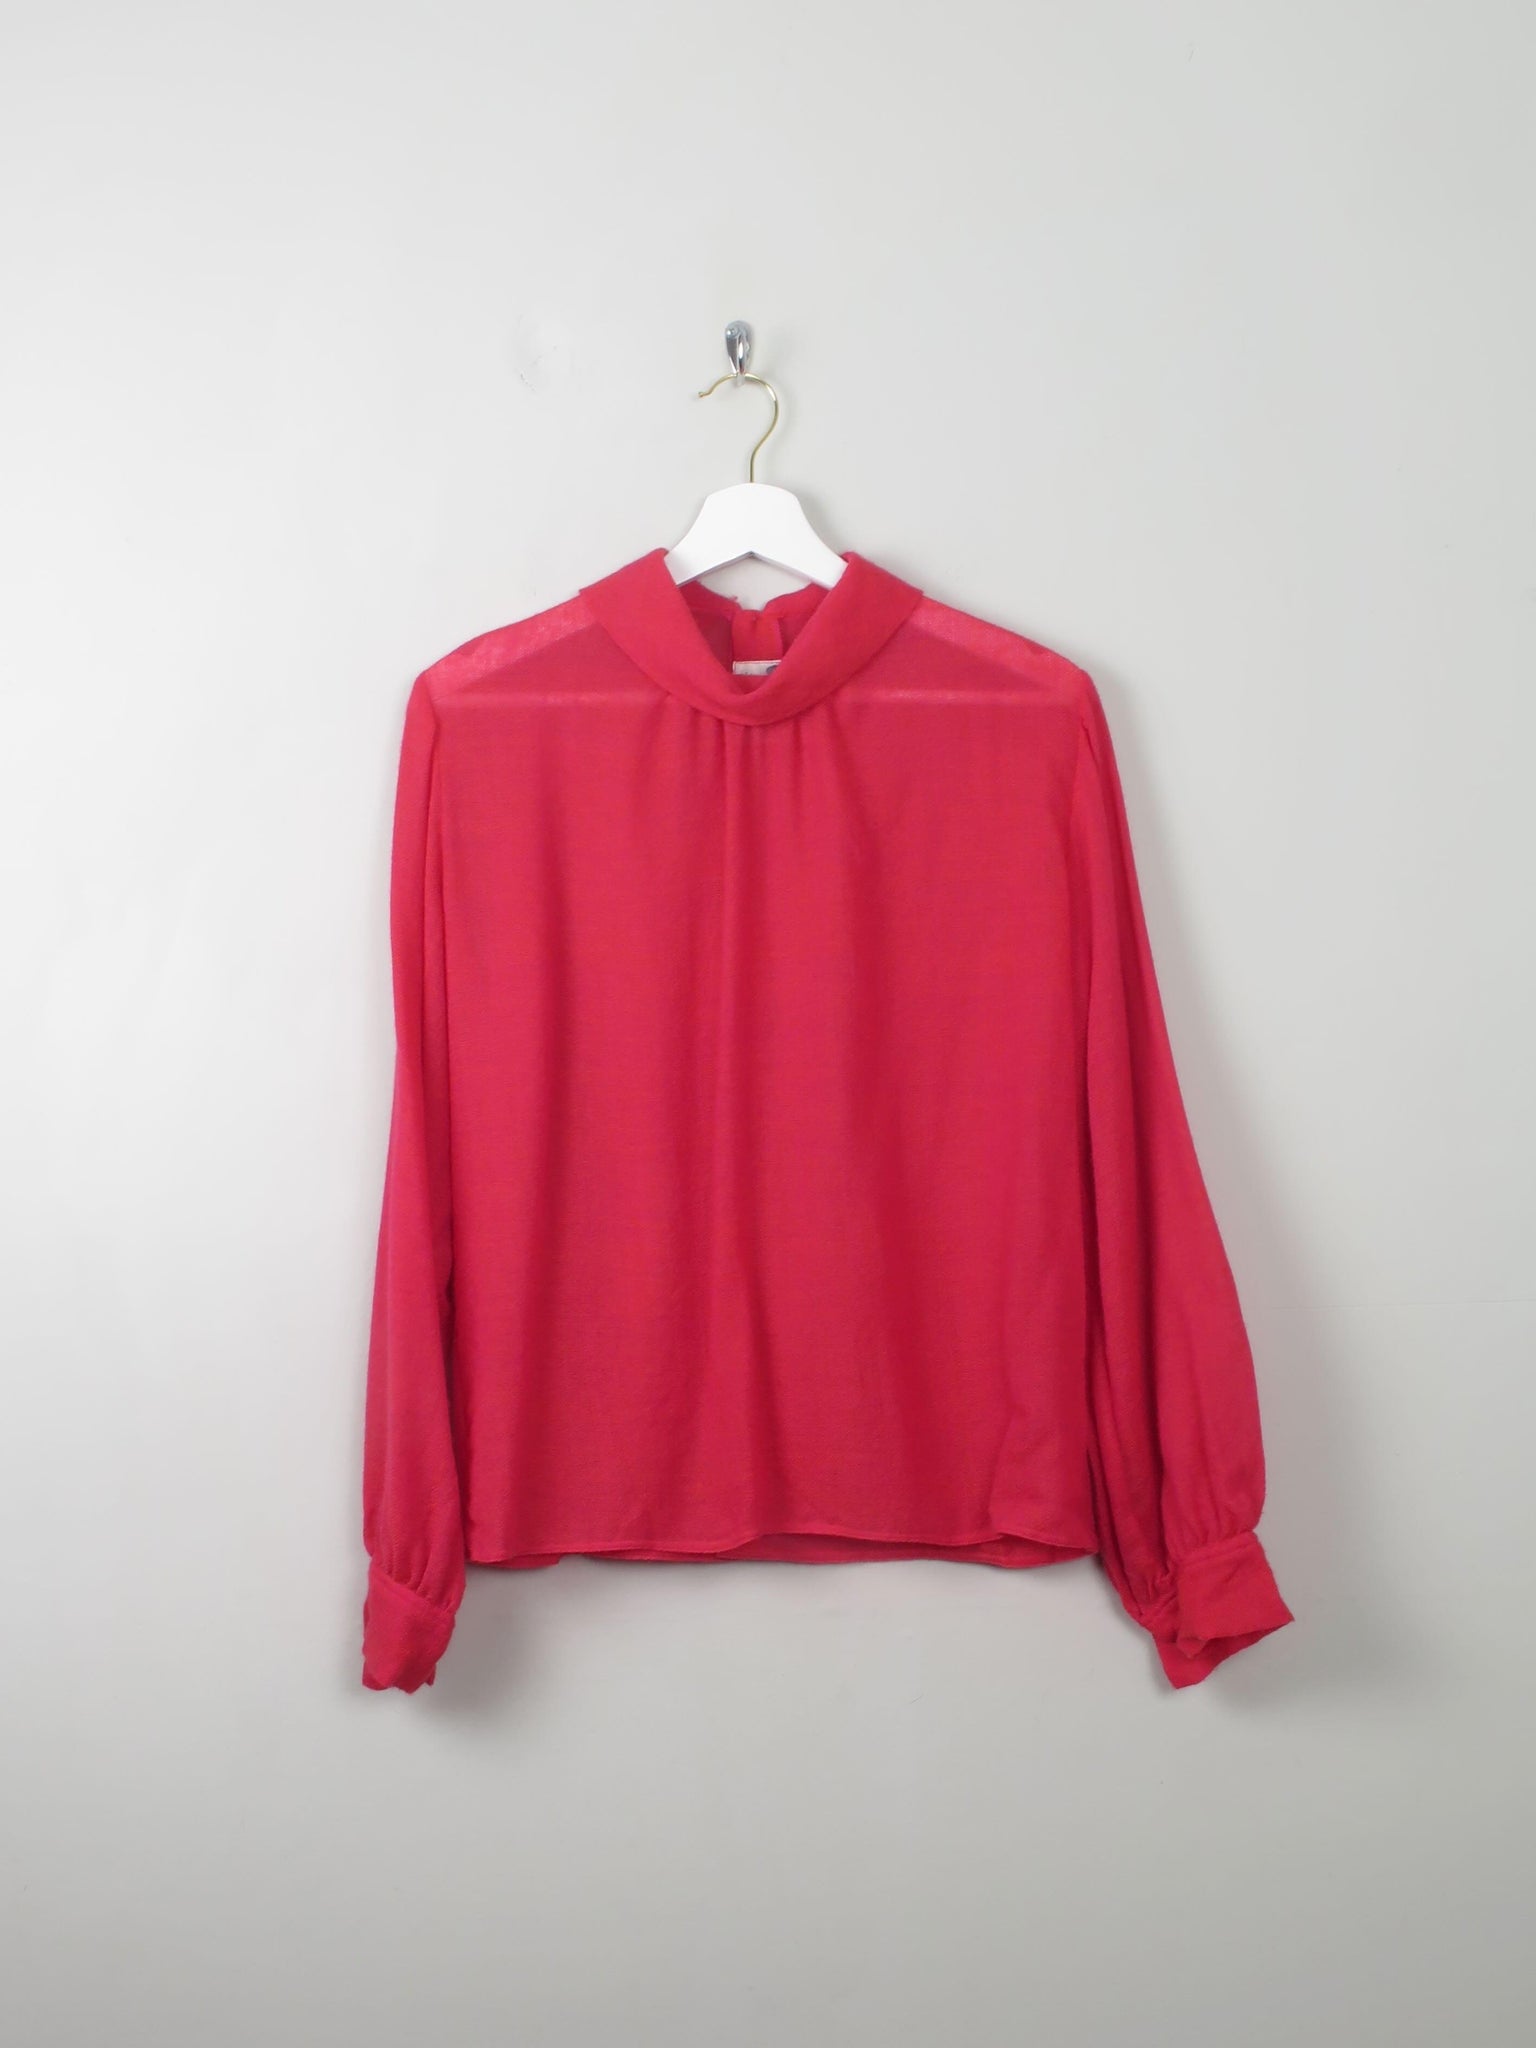 Women's Pink/Red Donald Davies Blouse M - The Harlequin